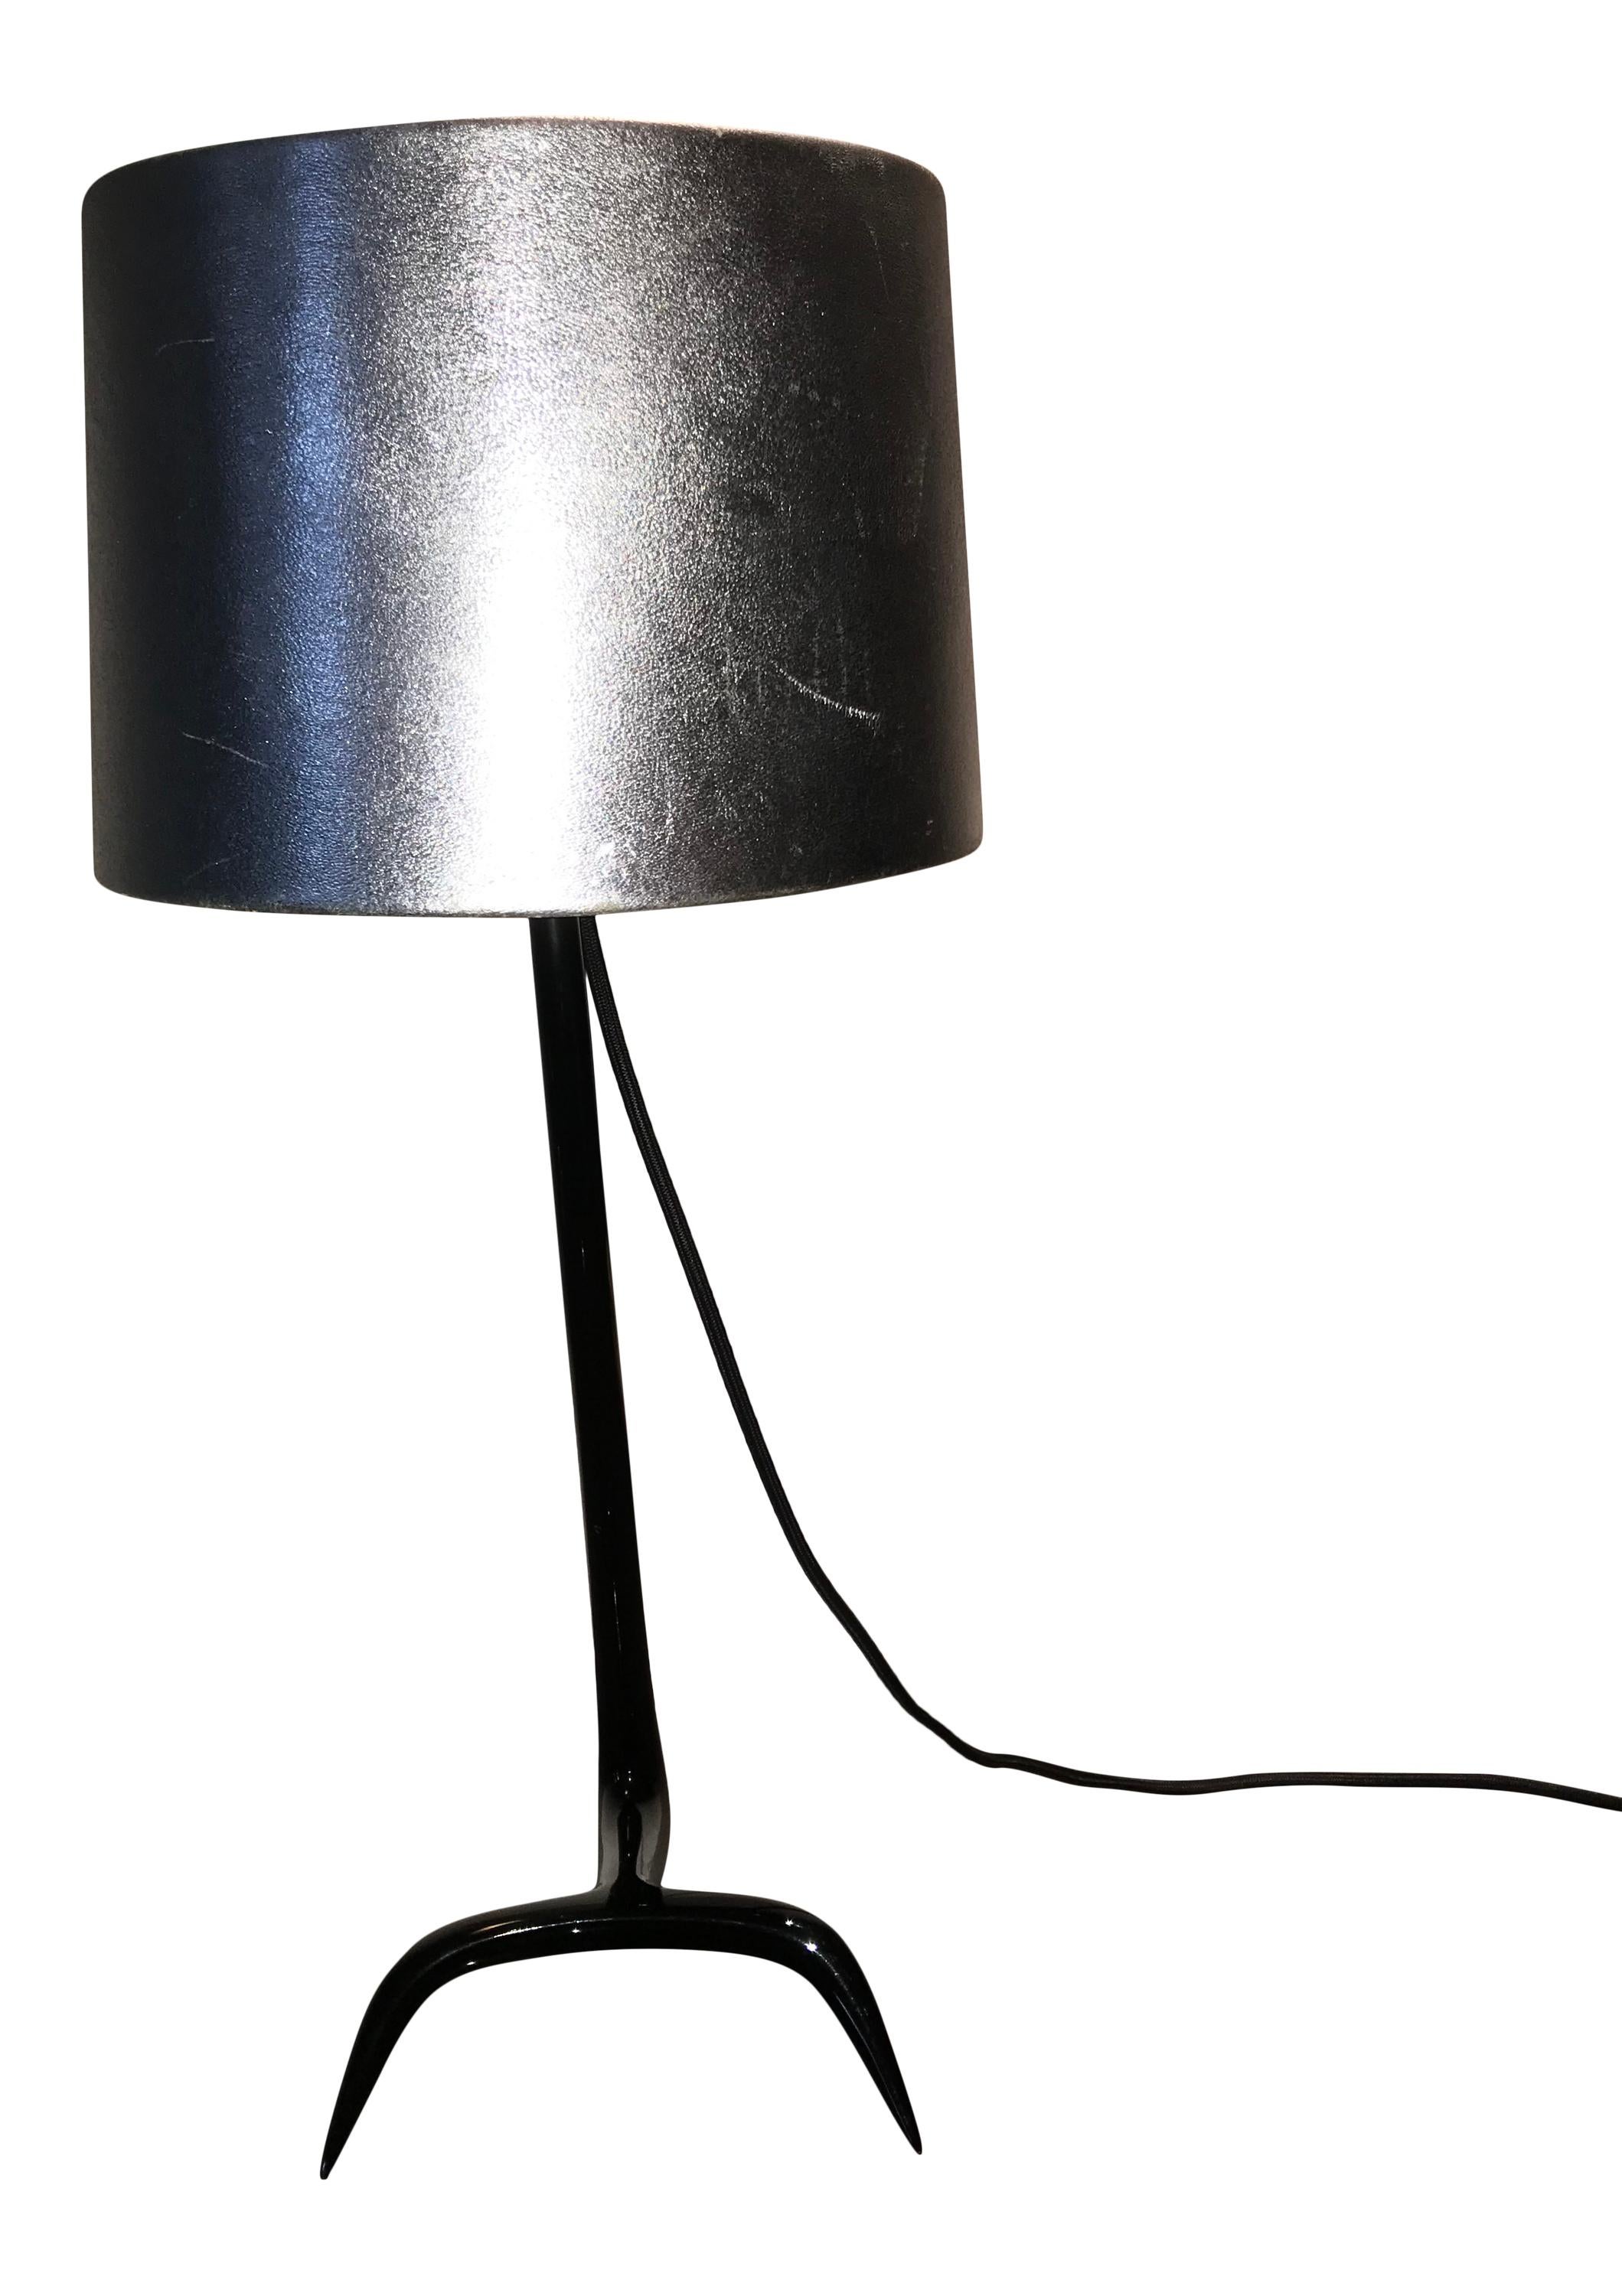 This stunning table lamp made by Maison Charles in their workshops in Saint Denis, Paris was originally designed by Jacques Charles in the 1970s and was re-released in the early 21st Century as a limited edition run made of cast Resin in stead of